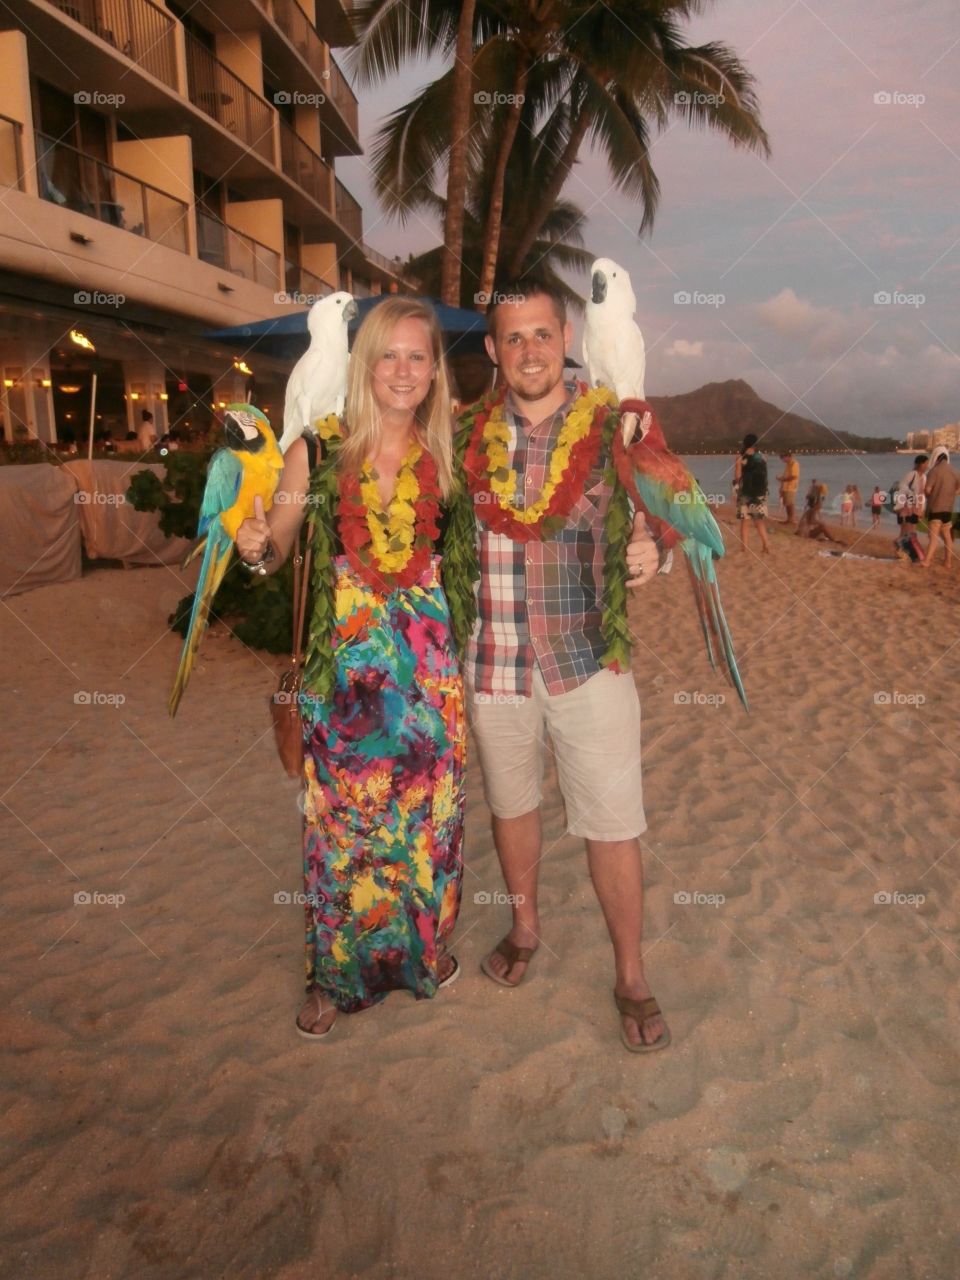 Full Hawaii!. Brightening the sunset with leis, parrots and a crazy dress!